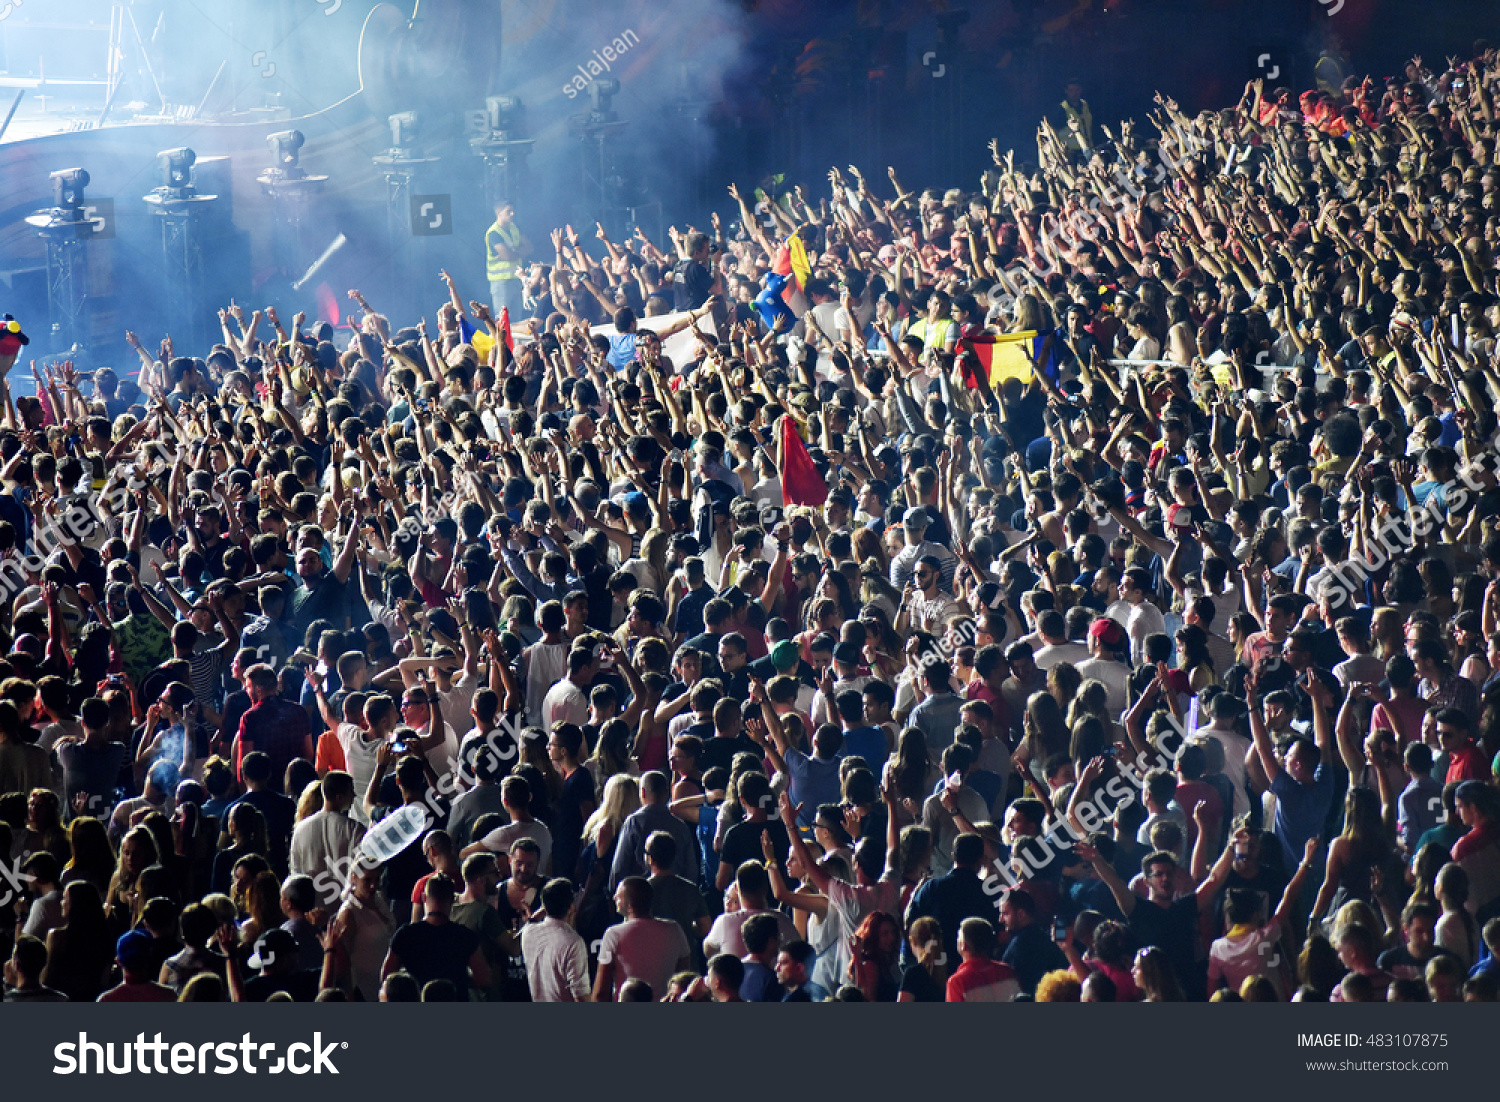 CLUJ-NAPOCA, ROMANIA - AUGUST 6, 2016: Crowd having fun during a Twoloud live concert at Untold Festival #483107875